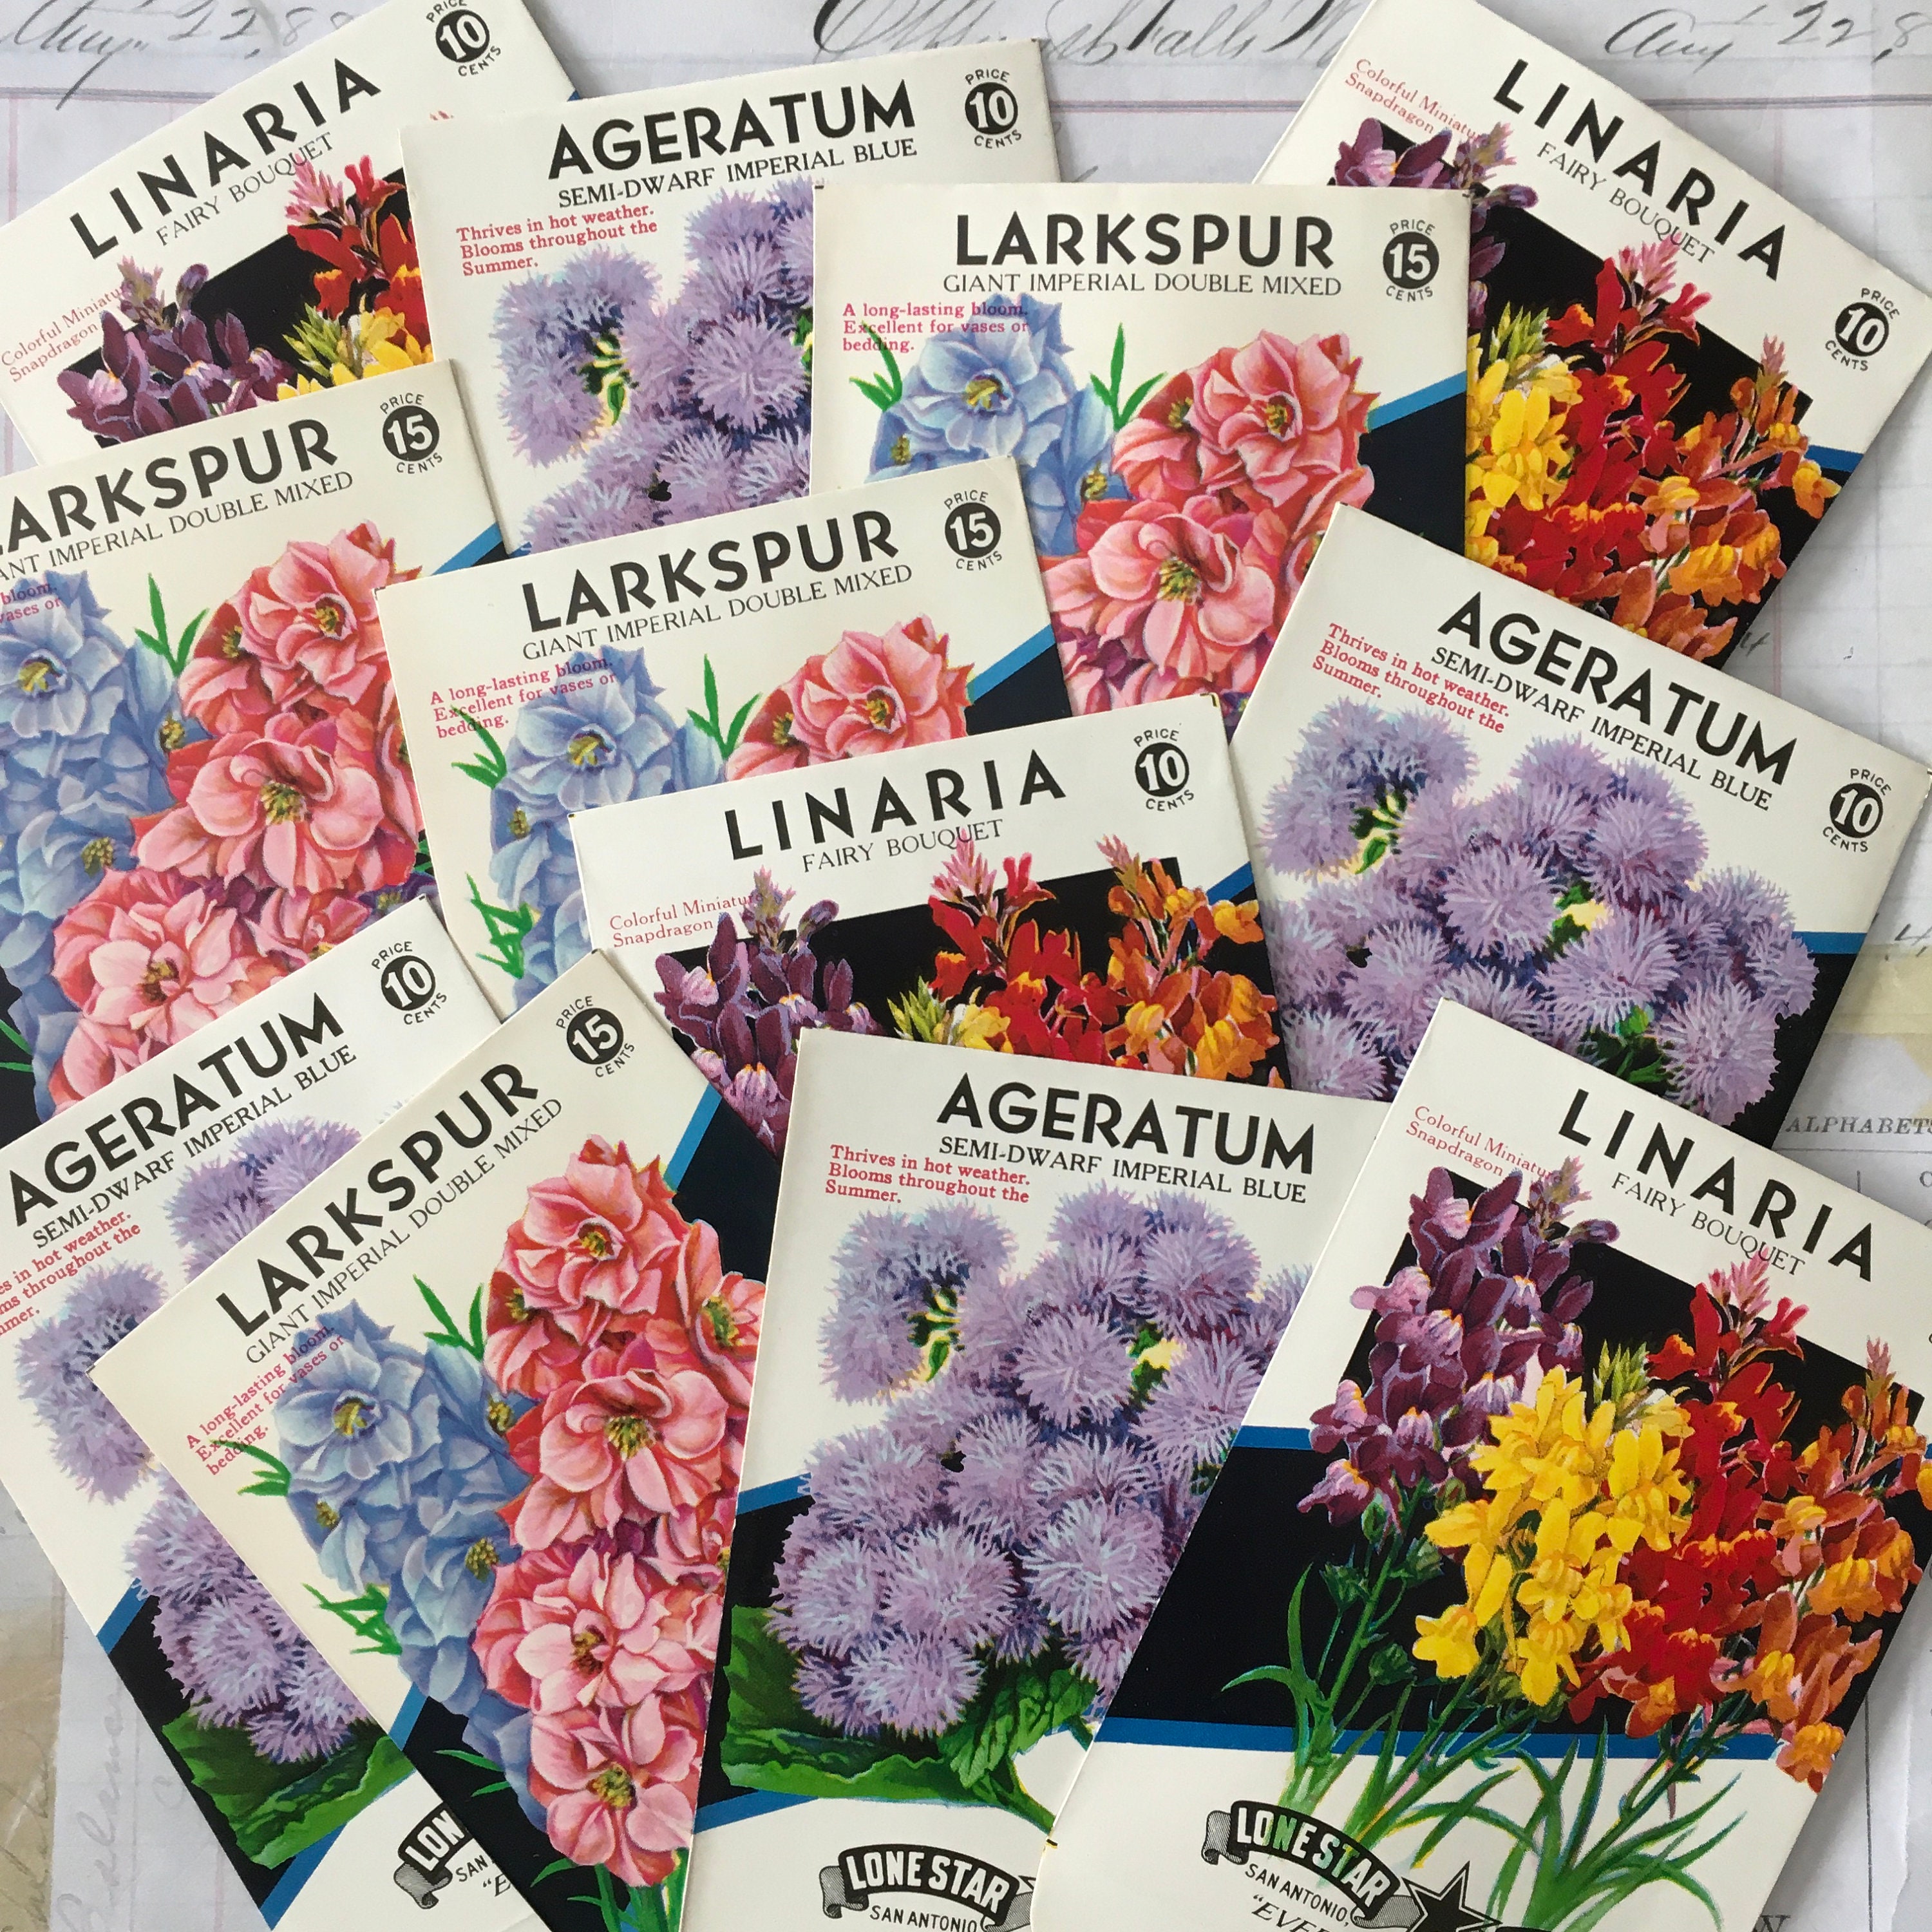 Seed Packets-empty / 3 Vintage Flower Packets Ageratum, Linaria